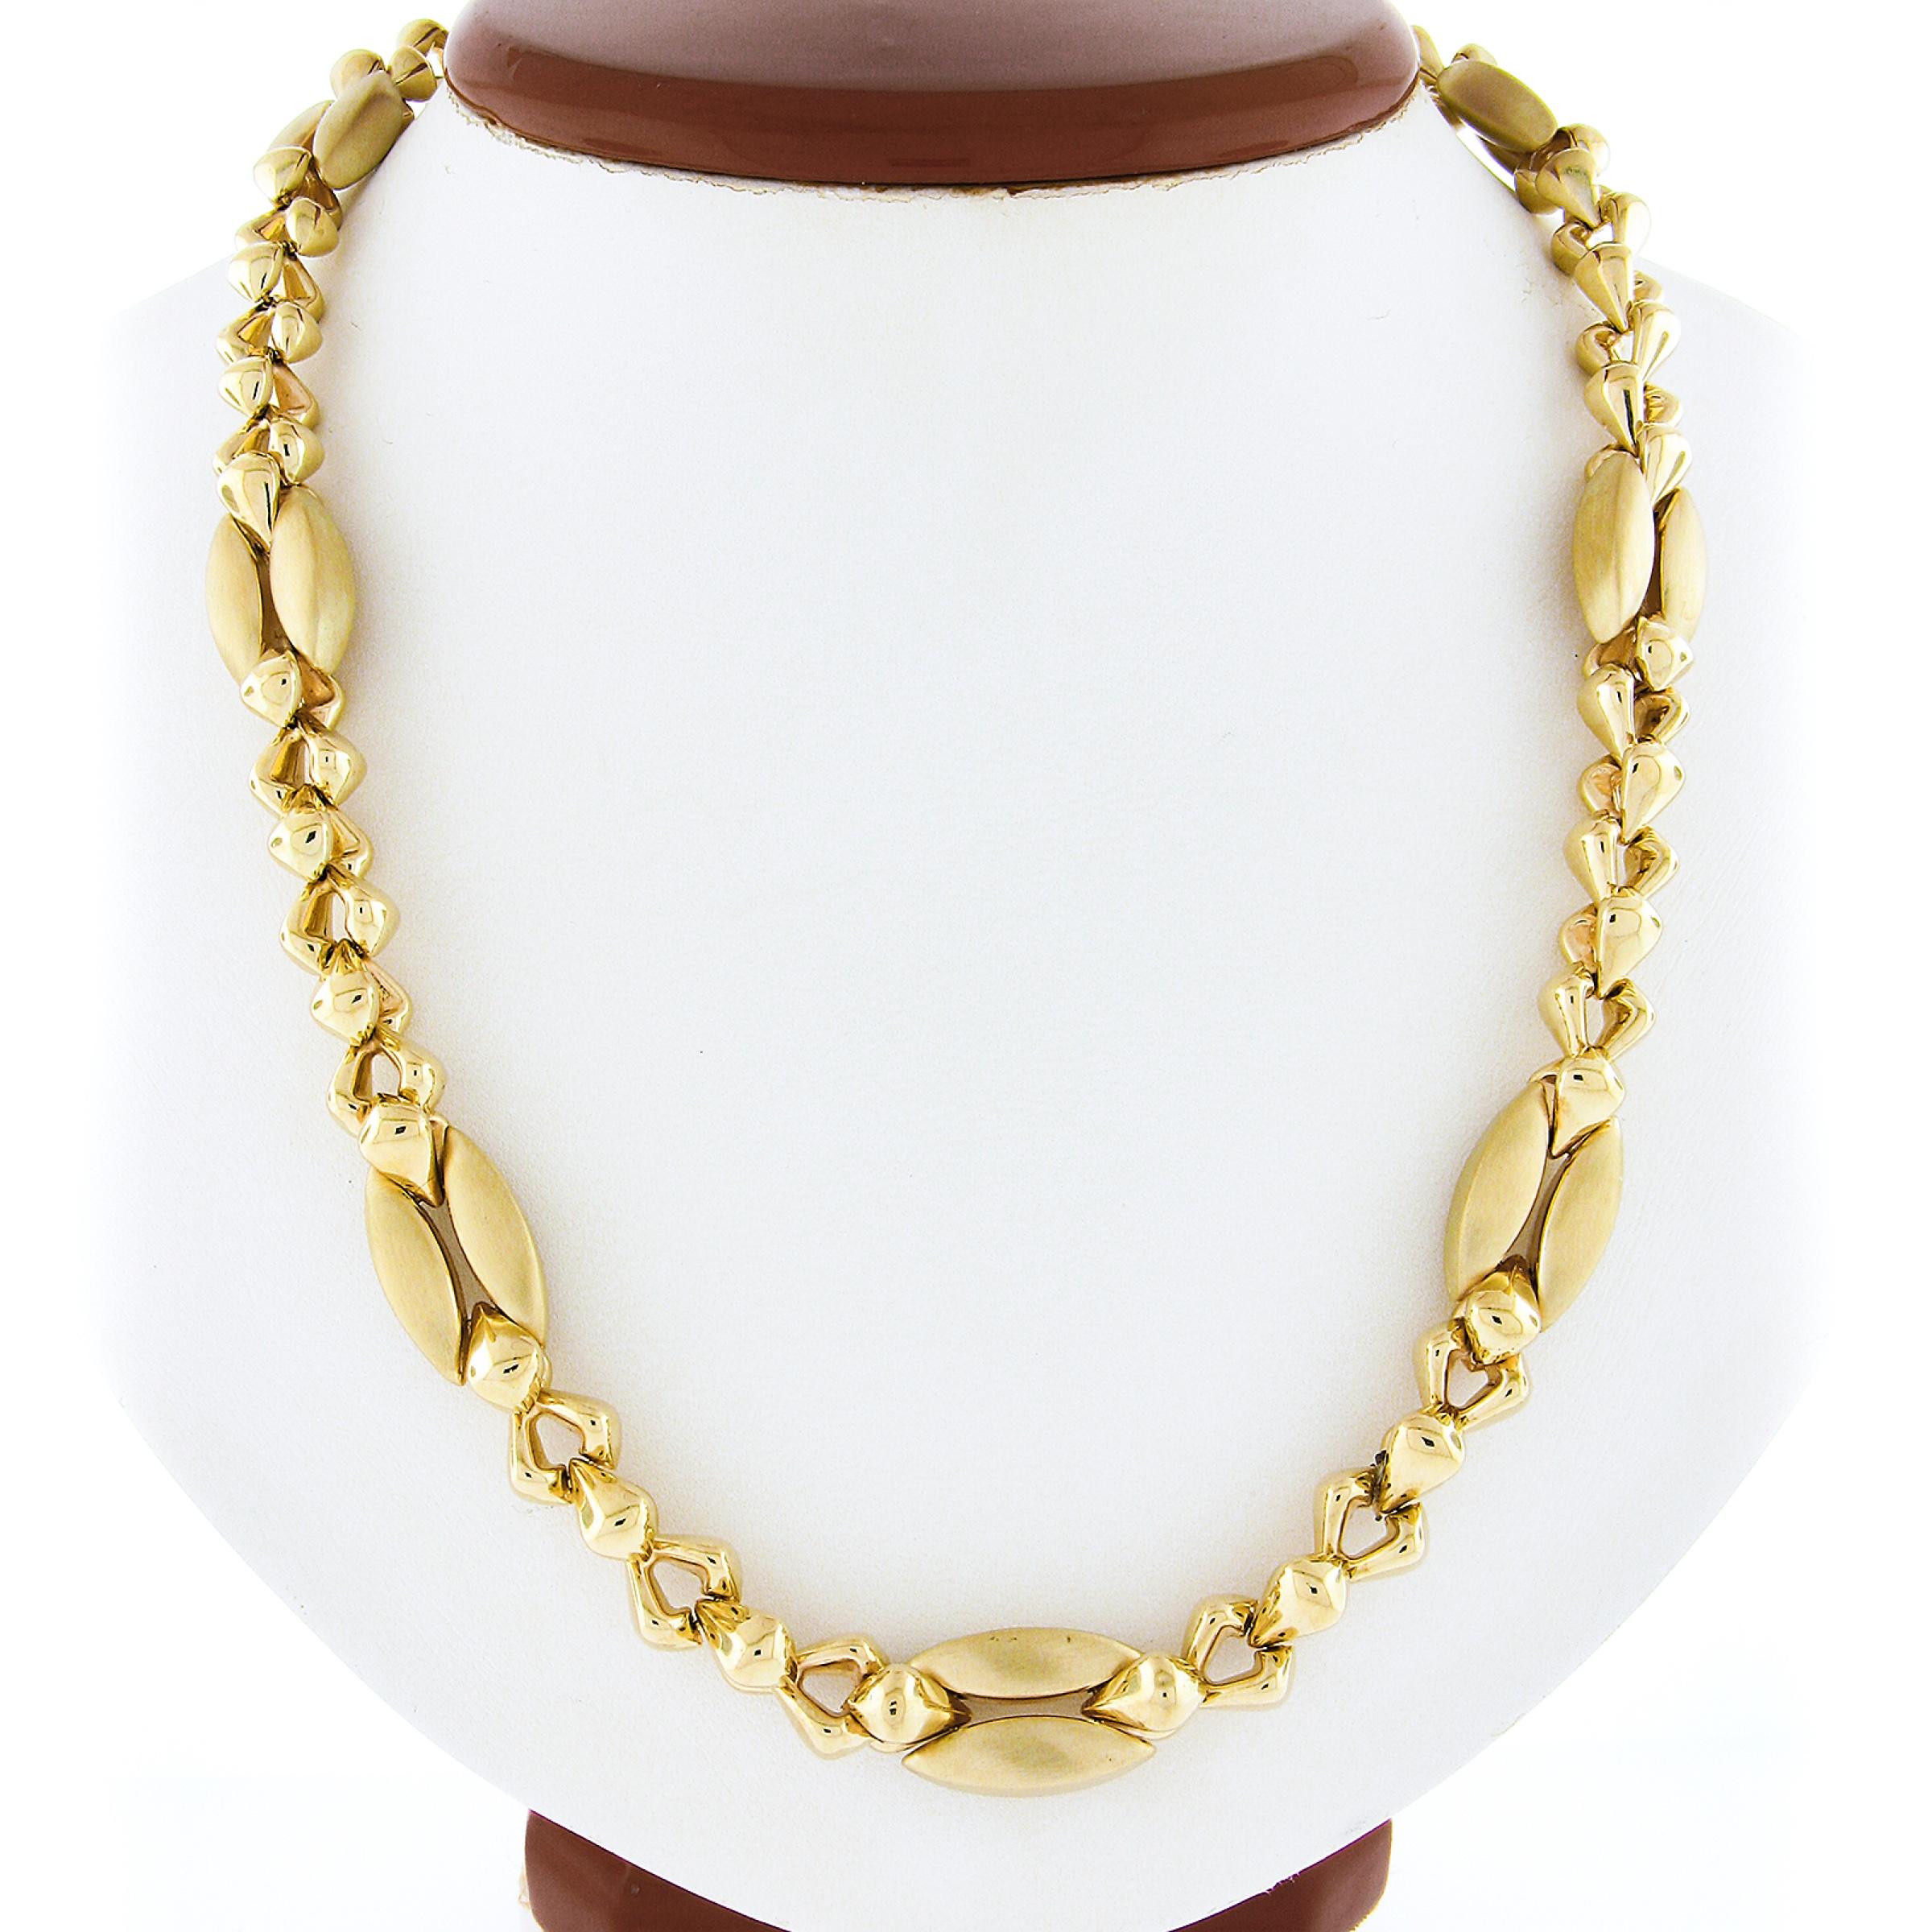 This long and fancy Italian made chain/necklace is very well crafted in solid 14k yellow gold and features a beautiful design that is constructed from links that alternate with a high polished and brushed finish sections throughout. The wonderful